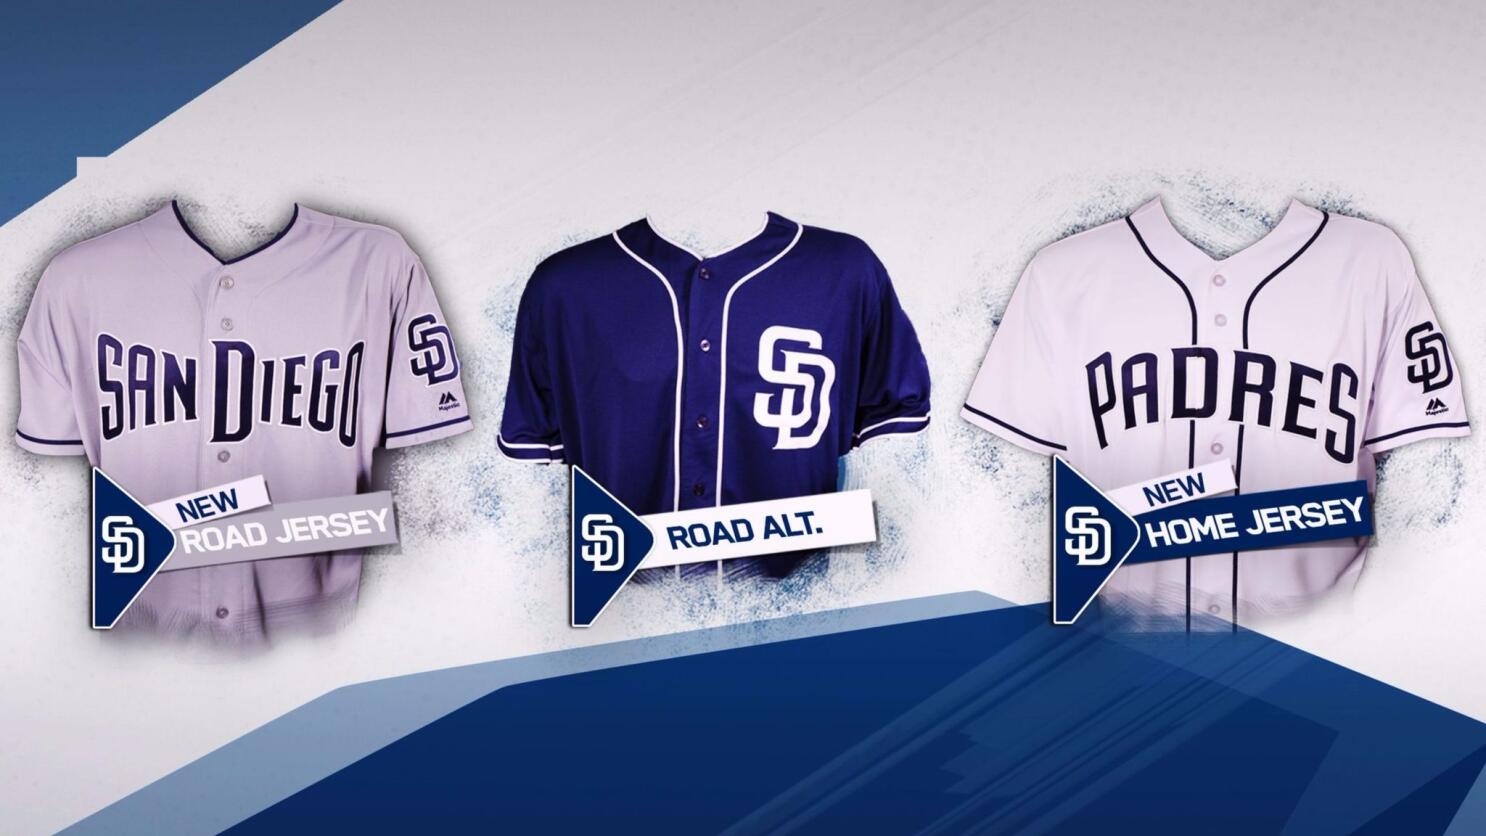 San Diego Padres unveil new uniforms in exciting fashion